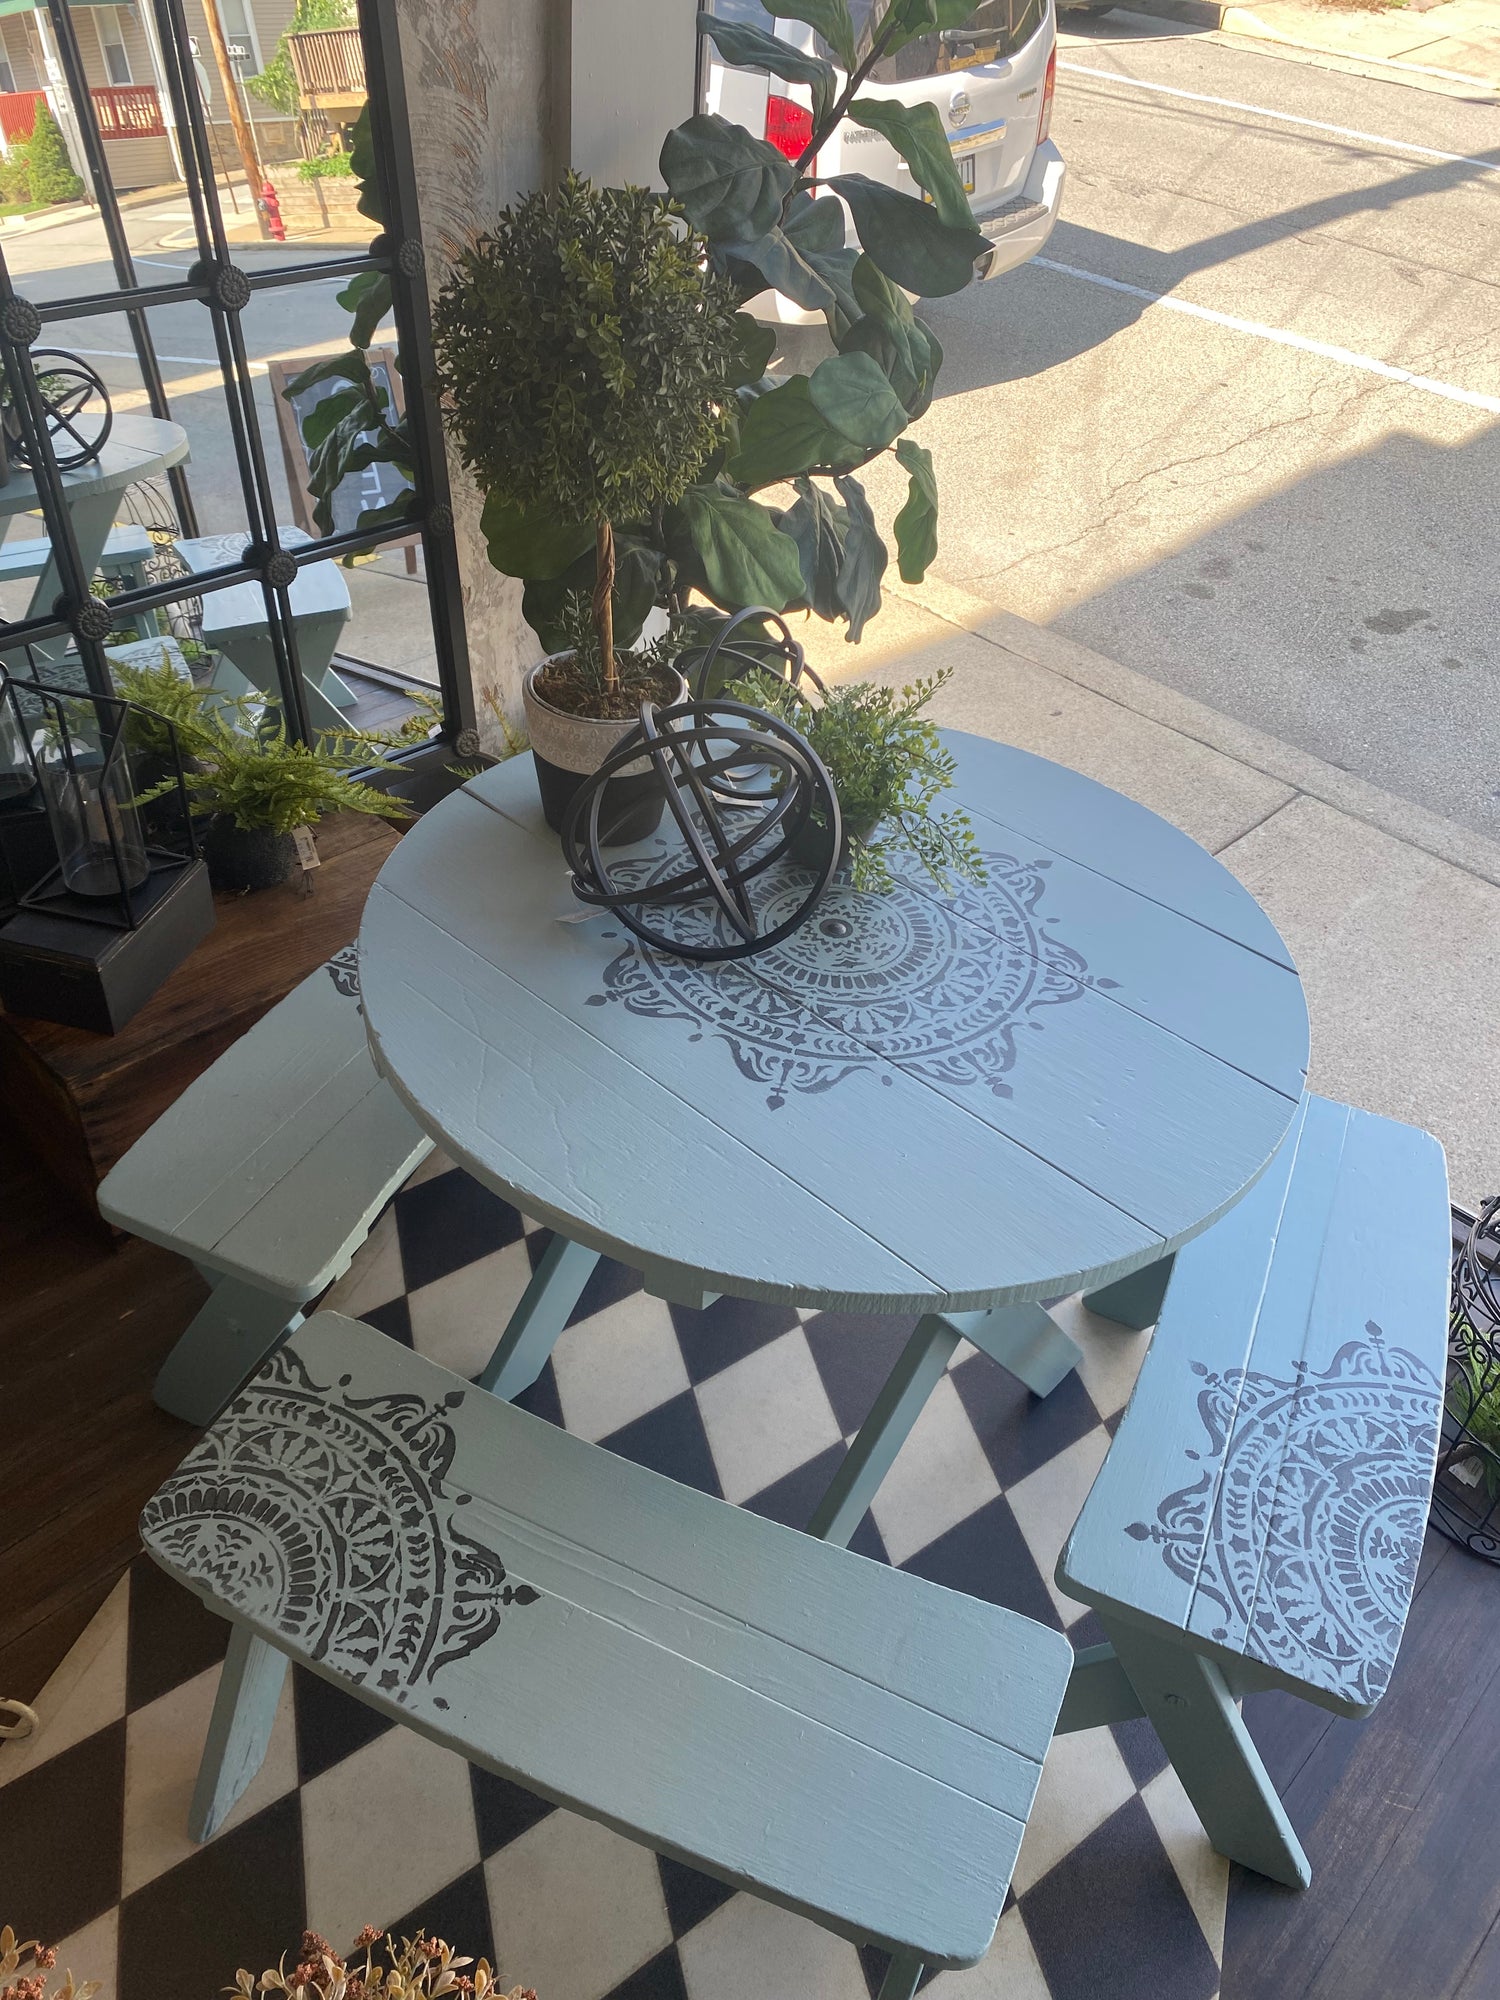 Image of a small round table sitting outside. The table is light gray with a darker gray design painted in the middle of the table and on each bench.